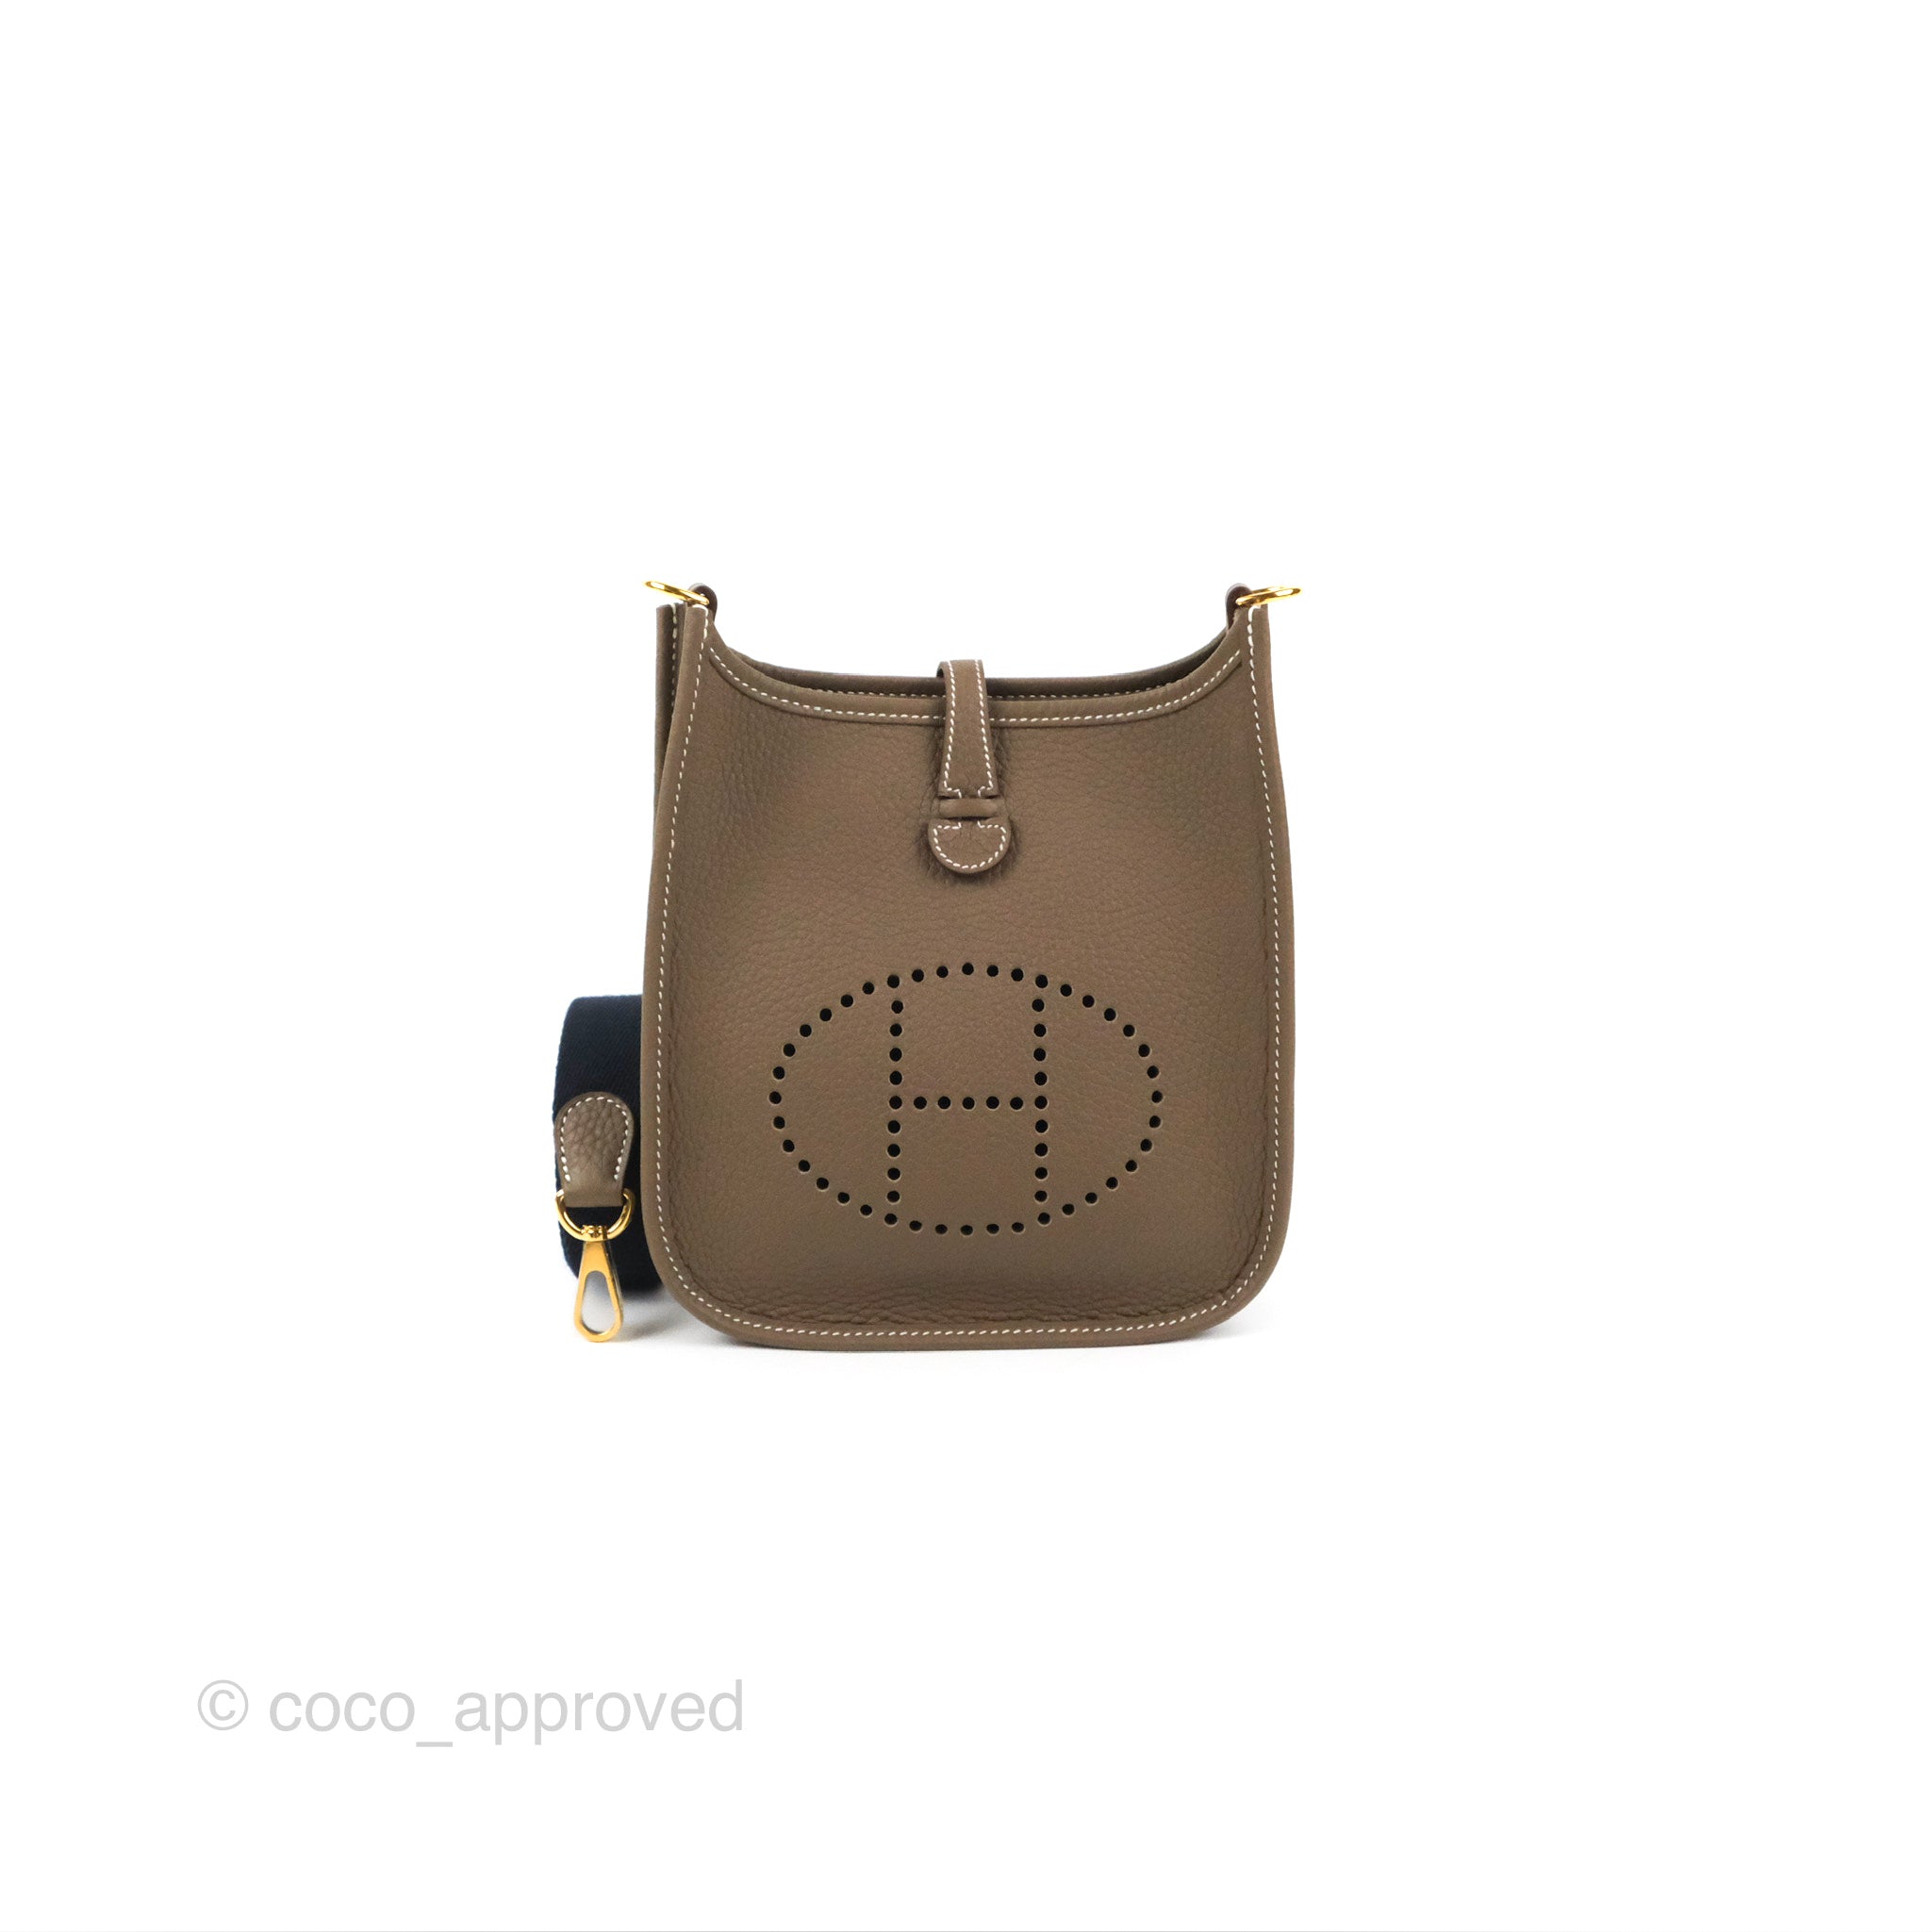 Hermès Hermès Evelyne 16 TPM Taurillon Clemence Leather Crossbody Bag-Etoupe  Gold Hardward (Wallets and Small Leather Goods,Wallets)